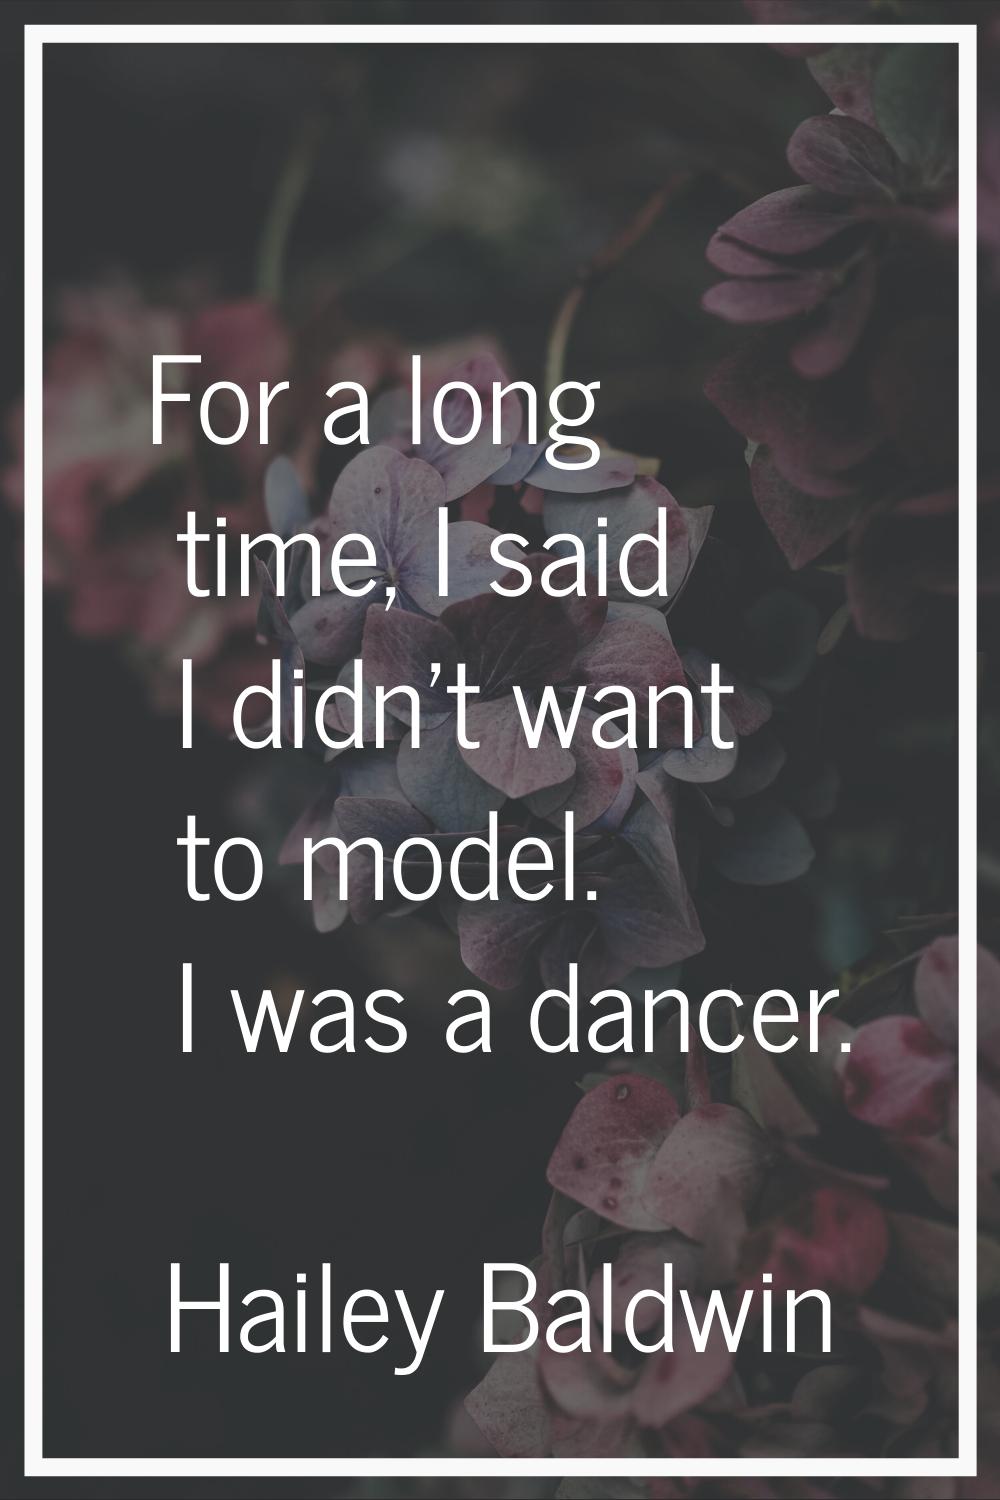 For a long time, I said I didn't want to model. I was a dancer.